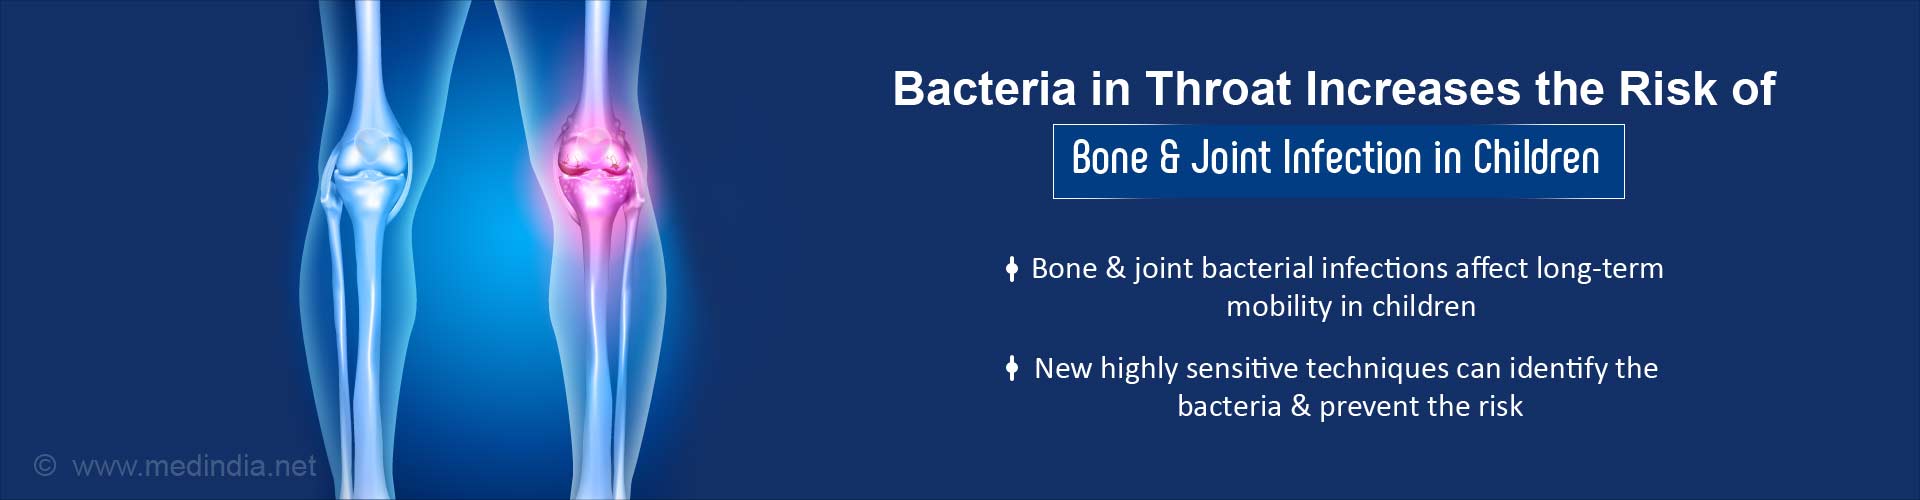 bacteria in throat increases the risk of bone & joint infection in children
- bone & joint bacterial infections affect long-term mobility in children
- new highly sensitive techniques can identify the bacteria & prevent the risk